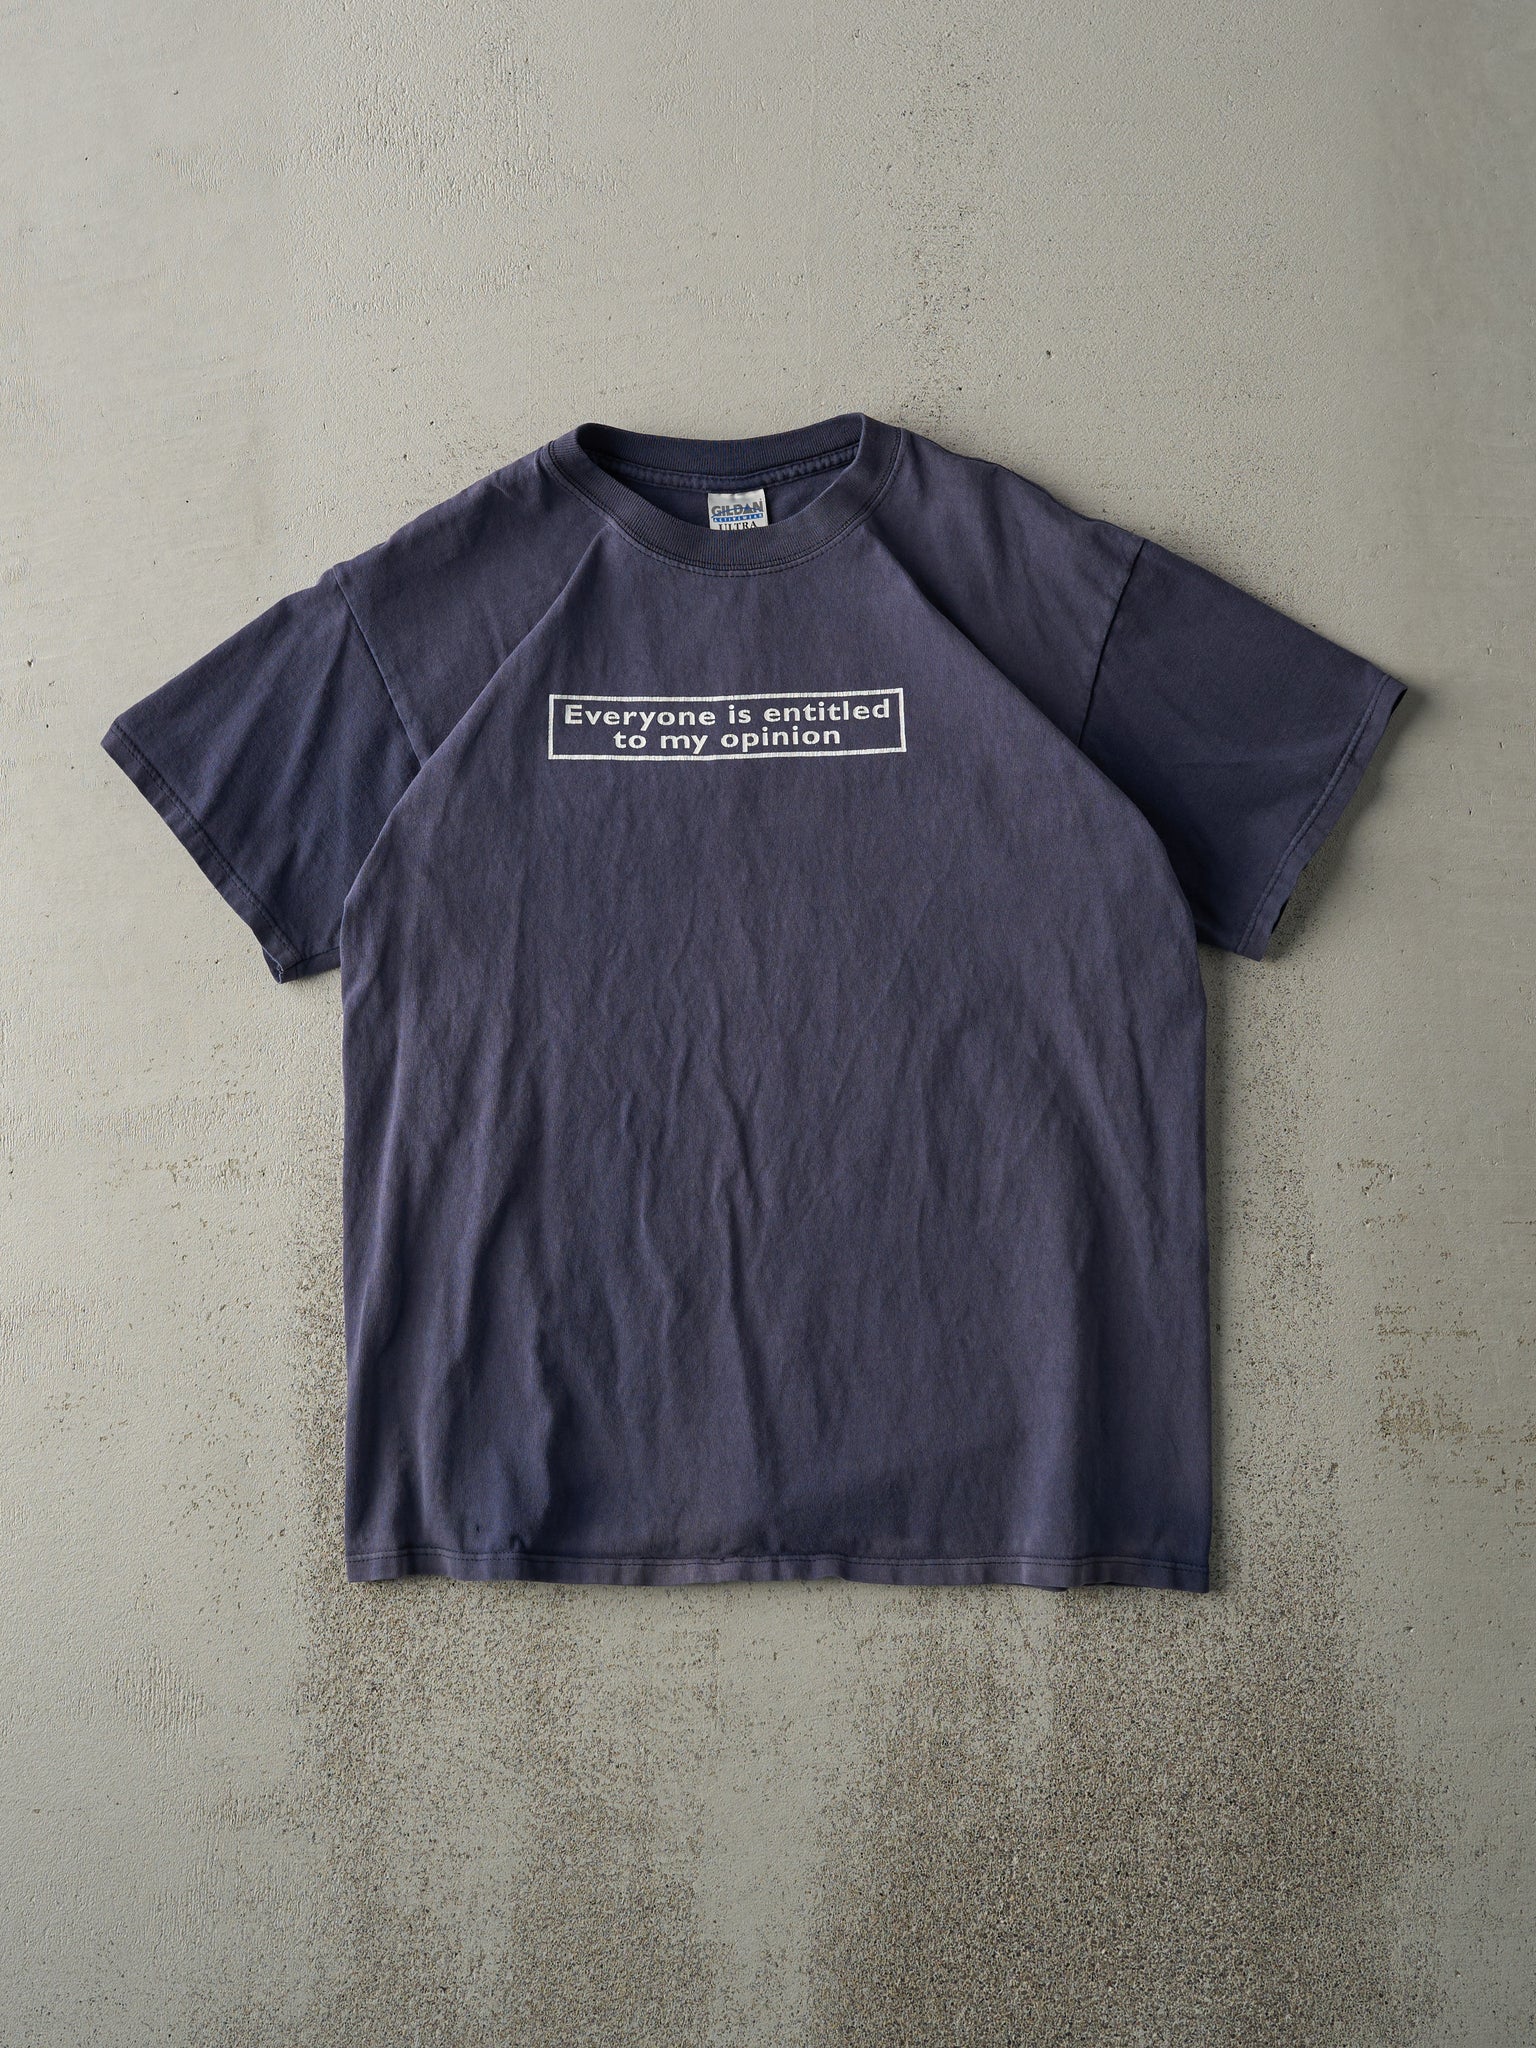 Vintage Y2K Navy Blue "Everyone Is Entitled To My Opinion" Tee (M)